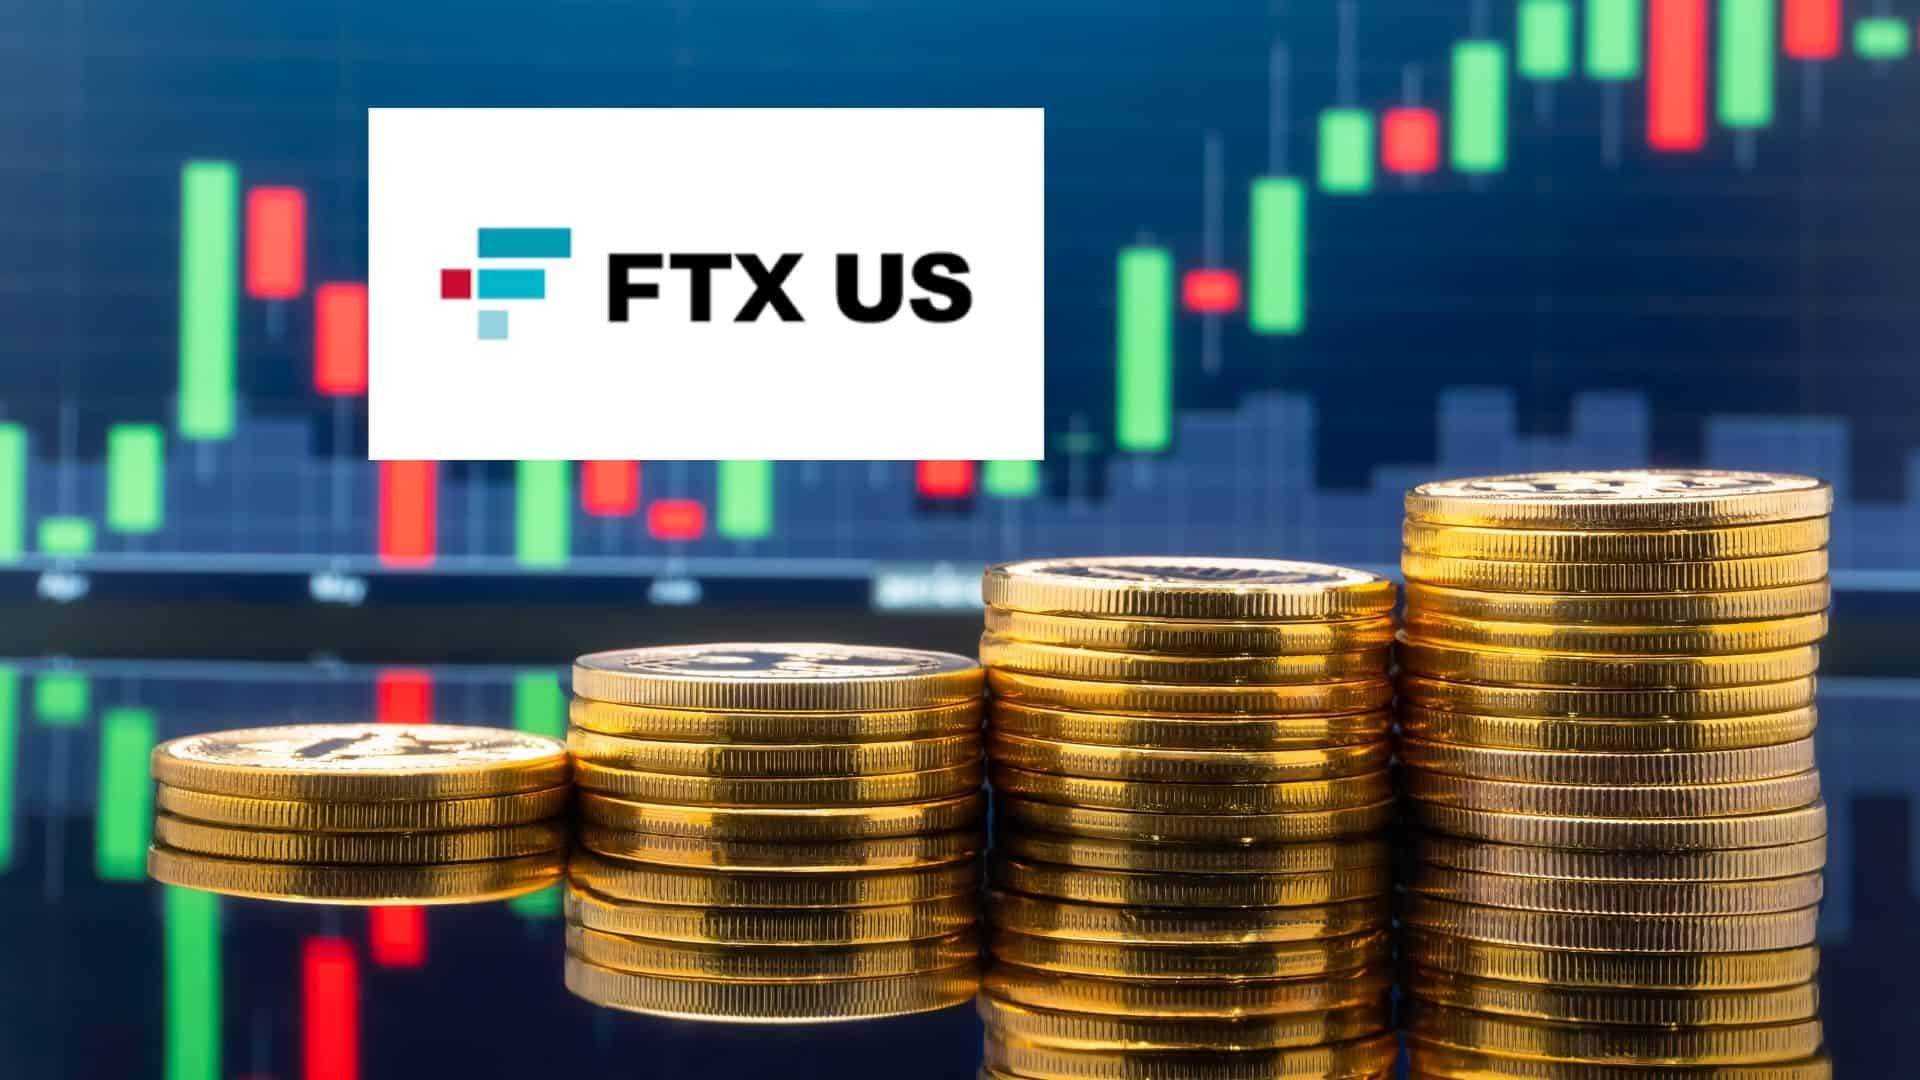 Crypto Exchange FTX US Daily Trading Volumes Jump 150-fold